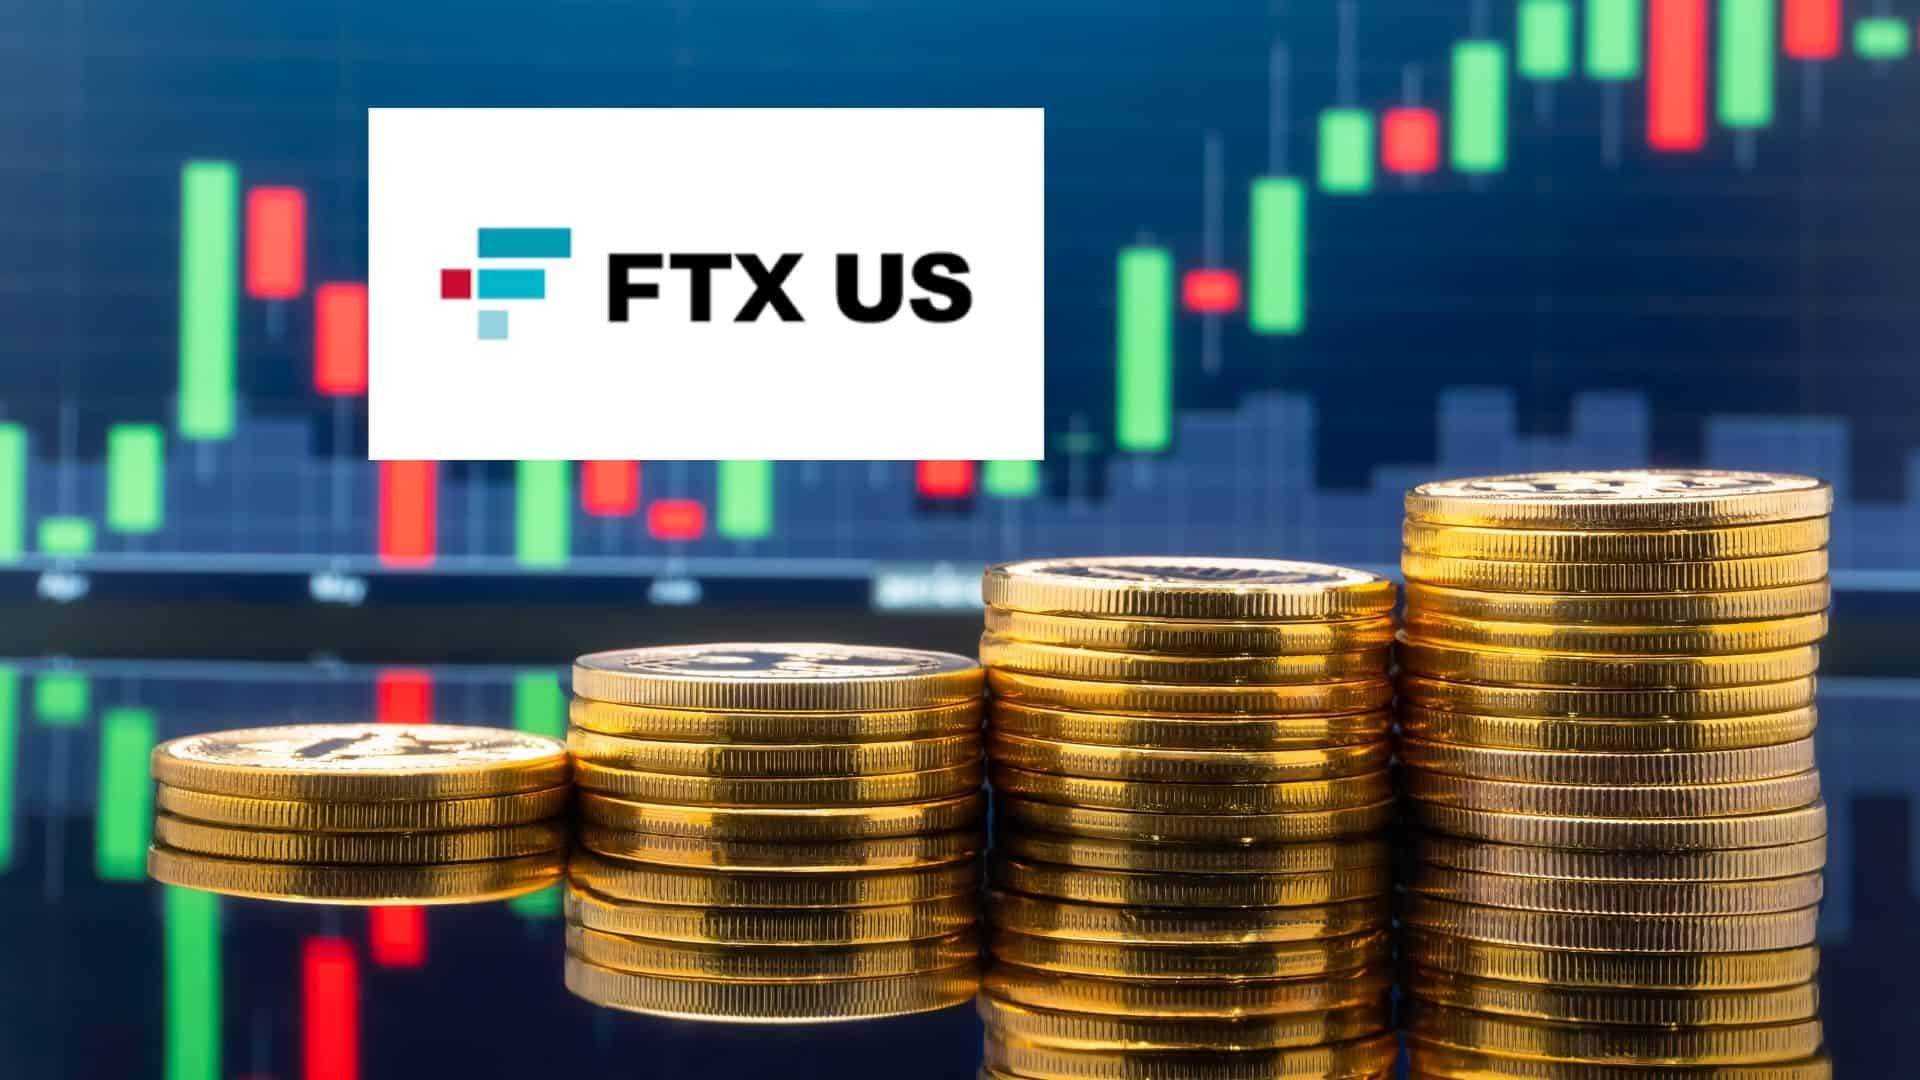 Crypto Exchange FTX US Daily Trading Volumes Jump 150-fold